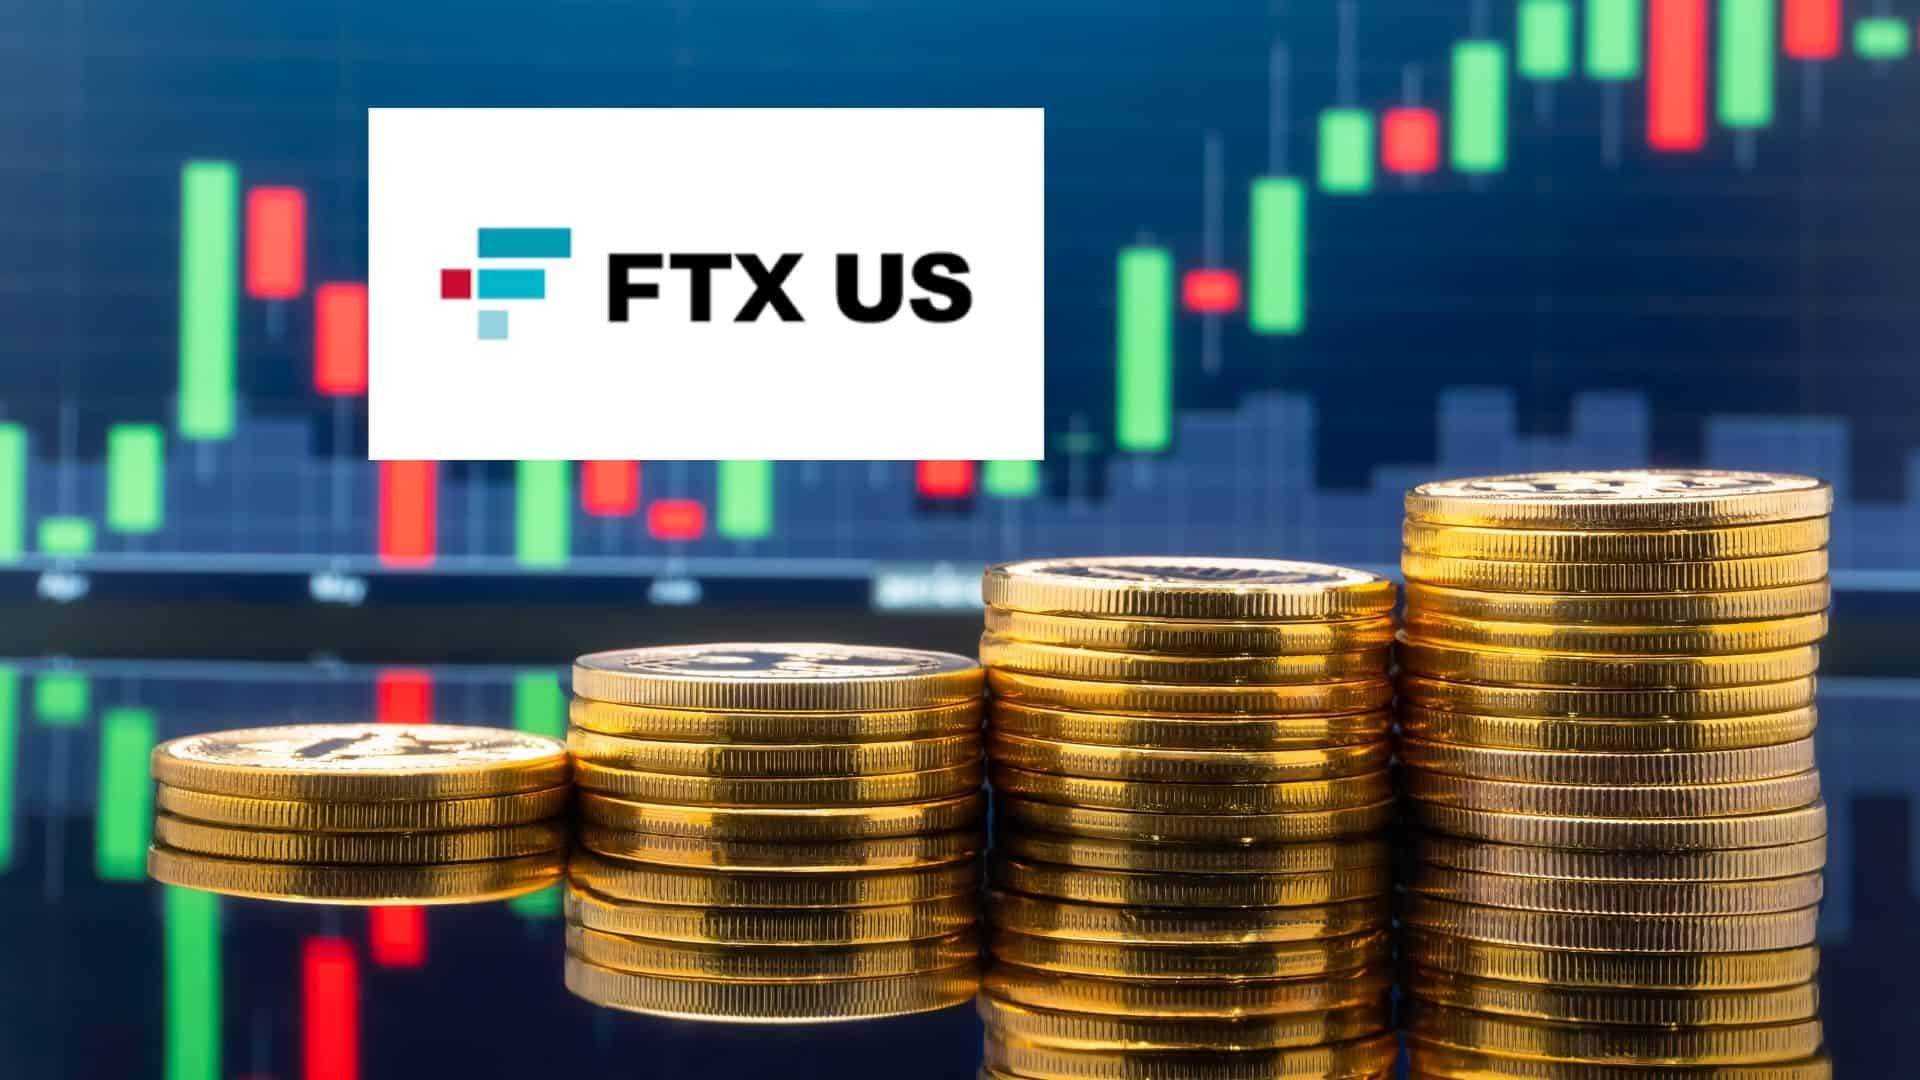 Crypto Exchange FTX US Daily Trading Volumes Jump 150-fold